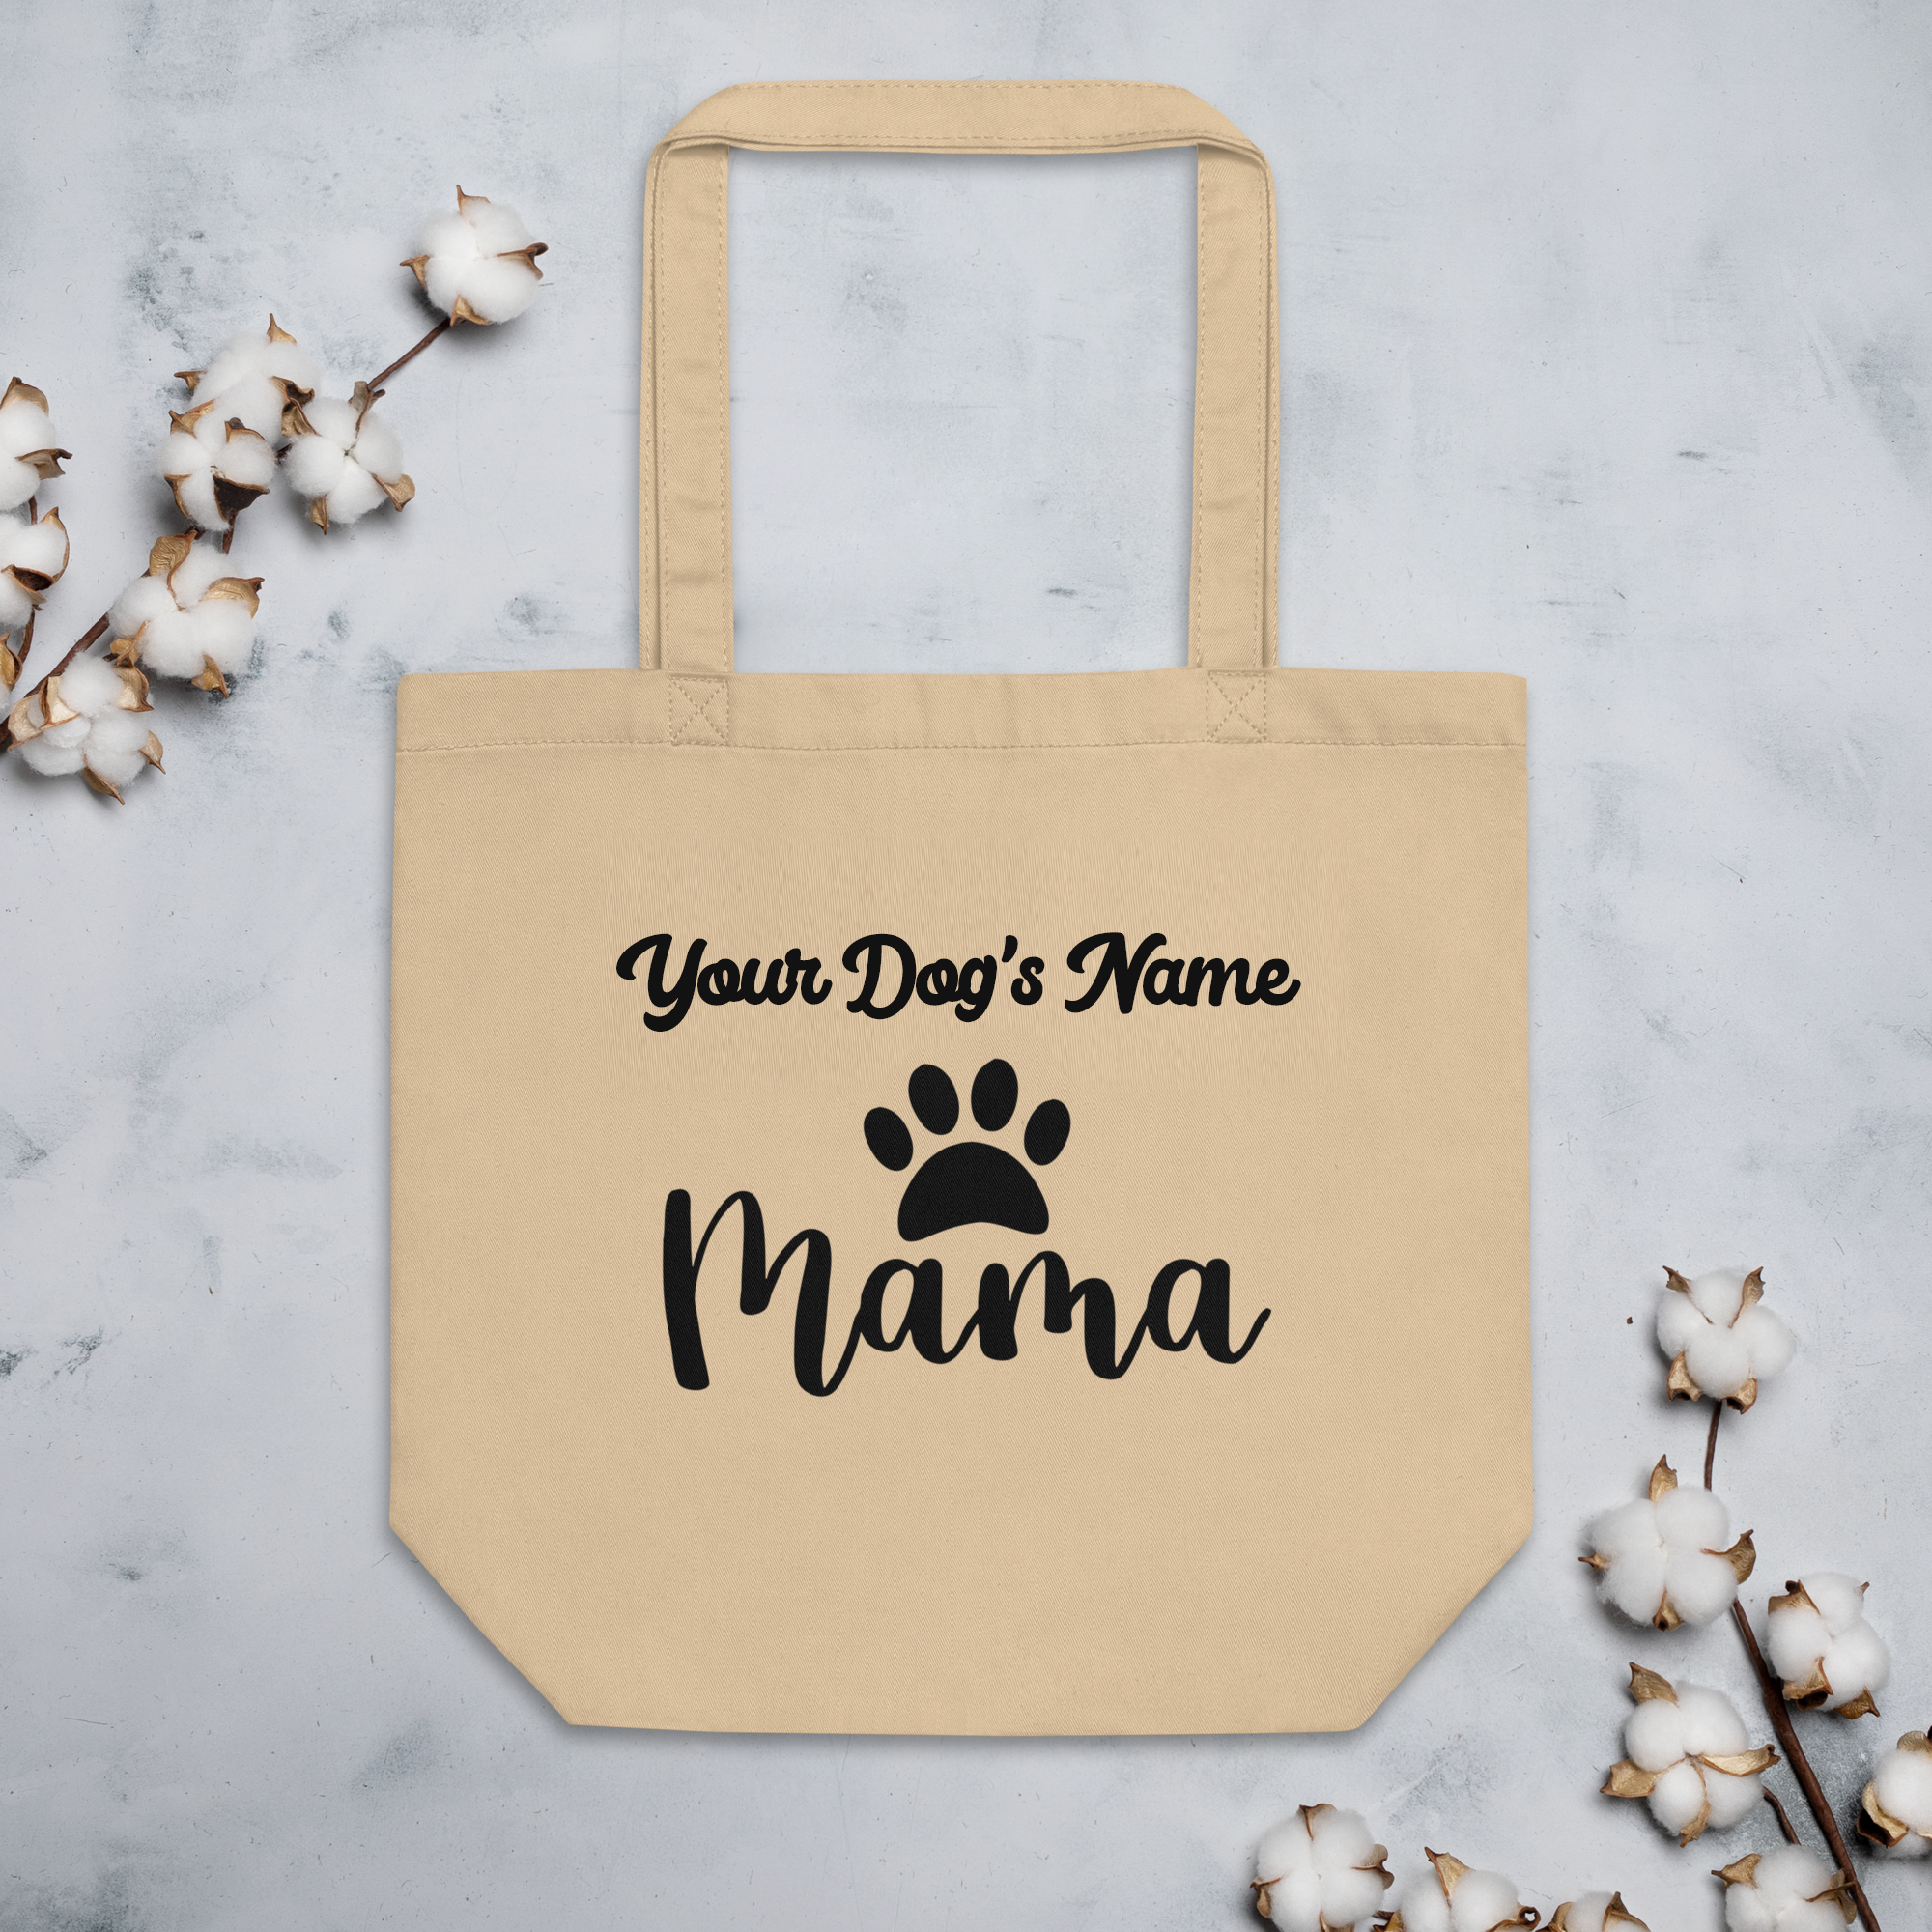 Important Dog Mom Stuff - Personalized Dog Tote Bag